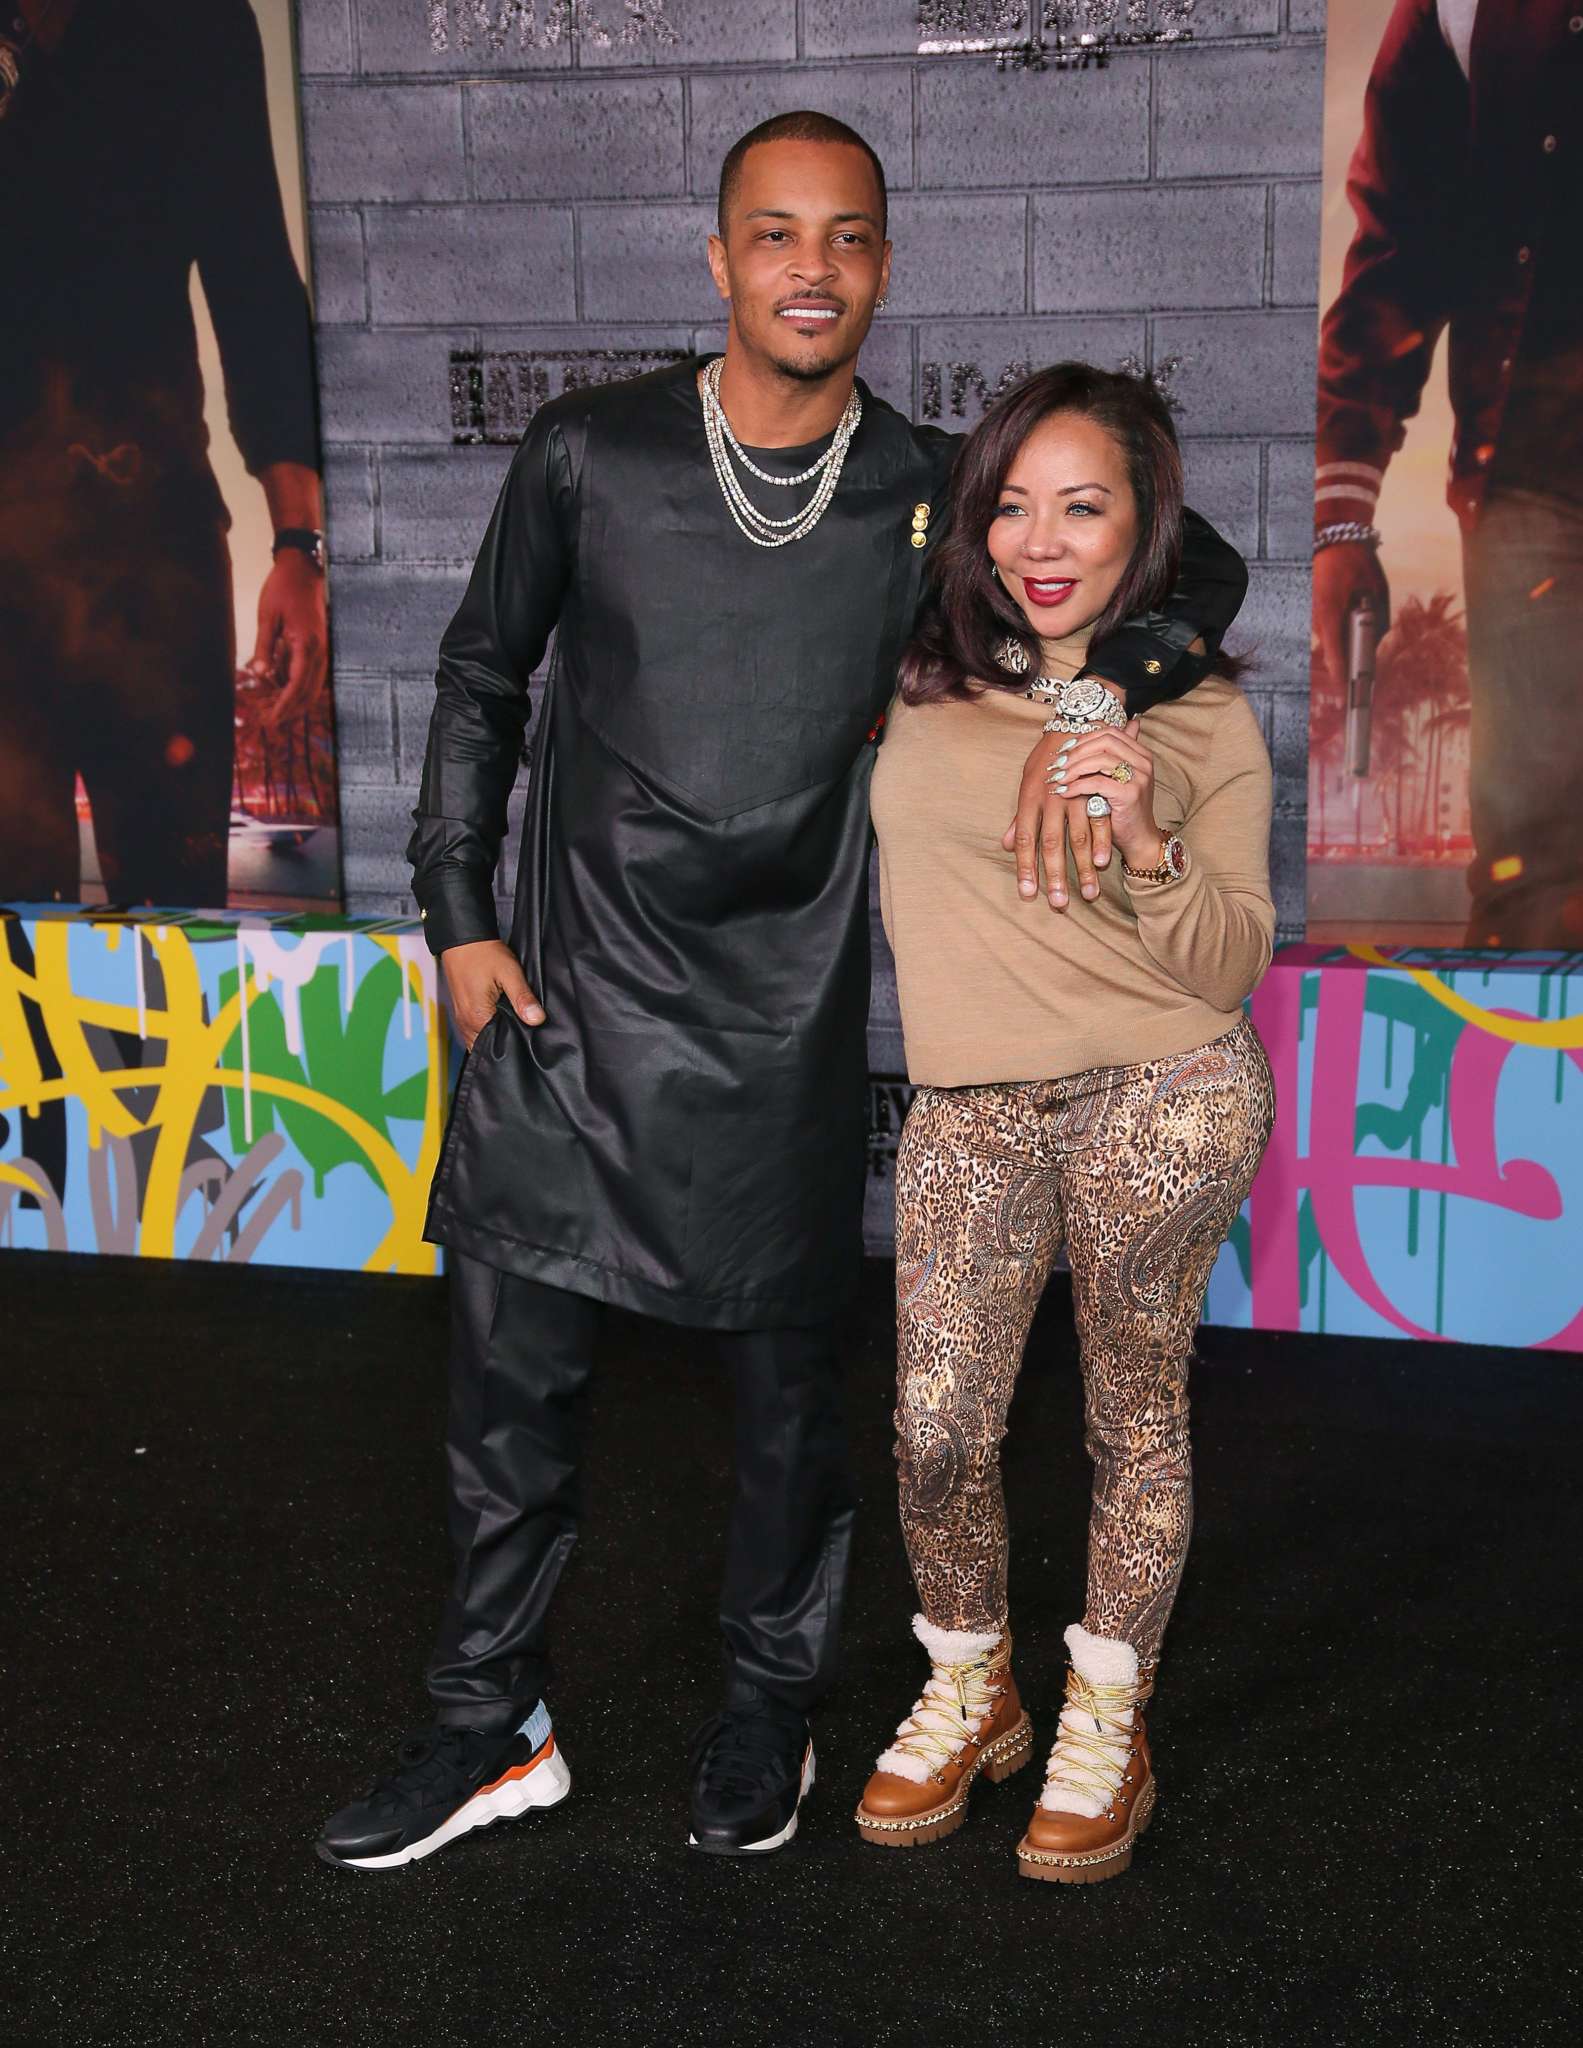 Tiny Harris' Latest Video Featuring T.I. Has People Calling Him 'King' - See The Clip Here